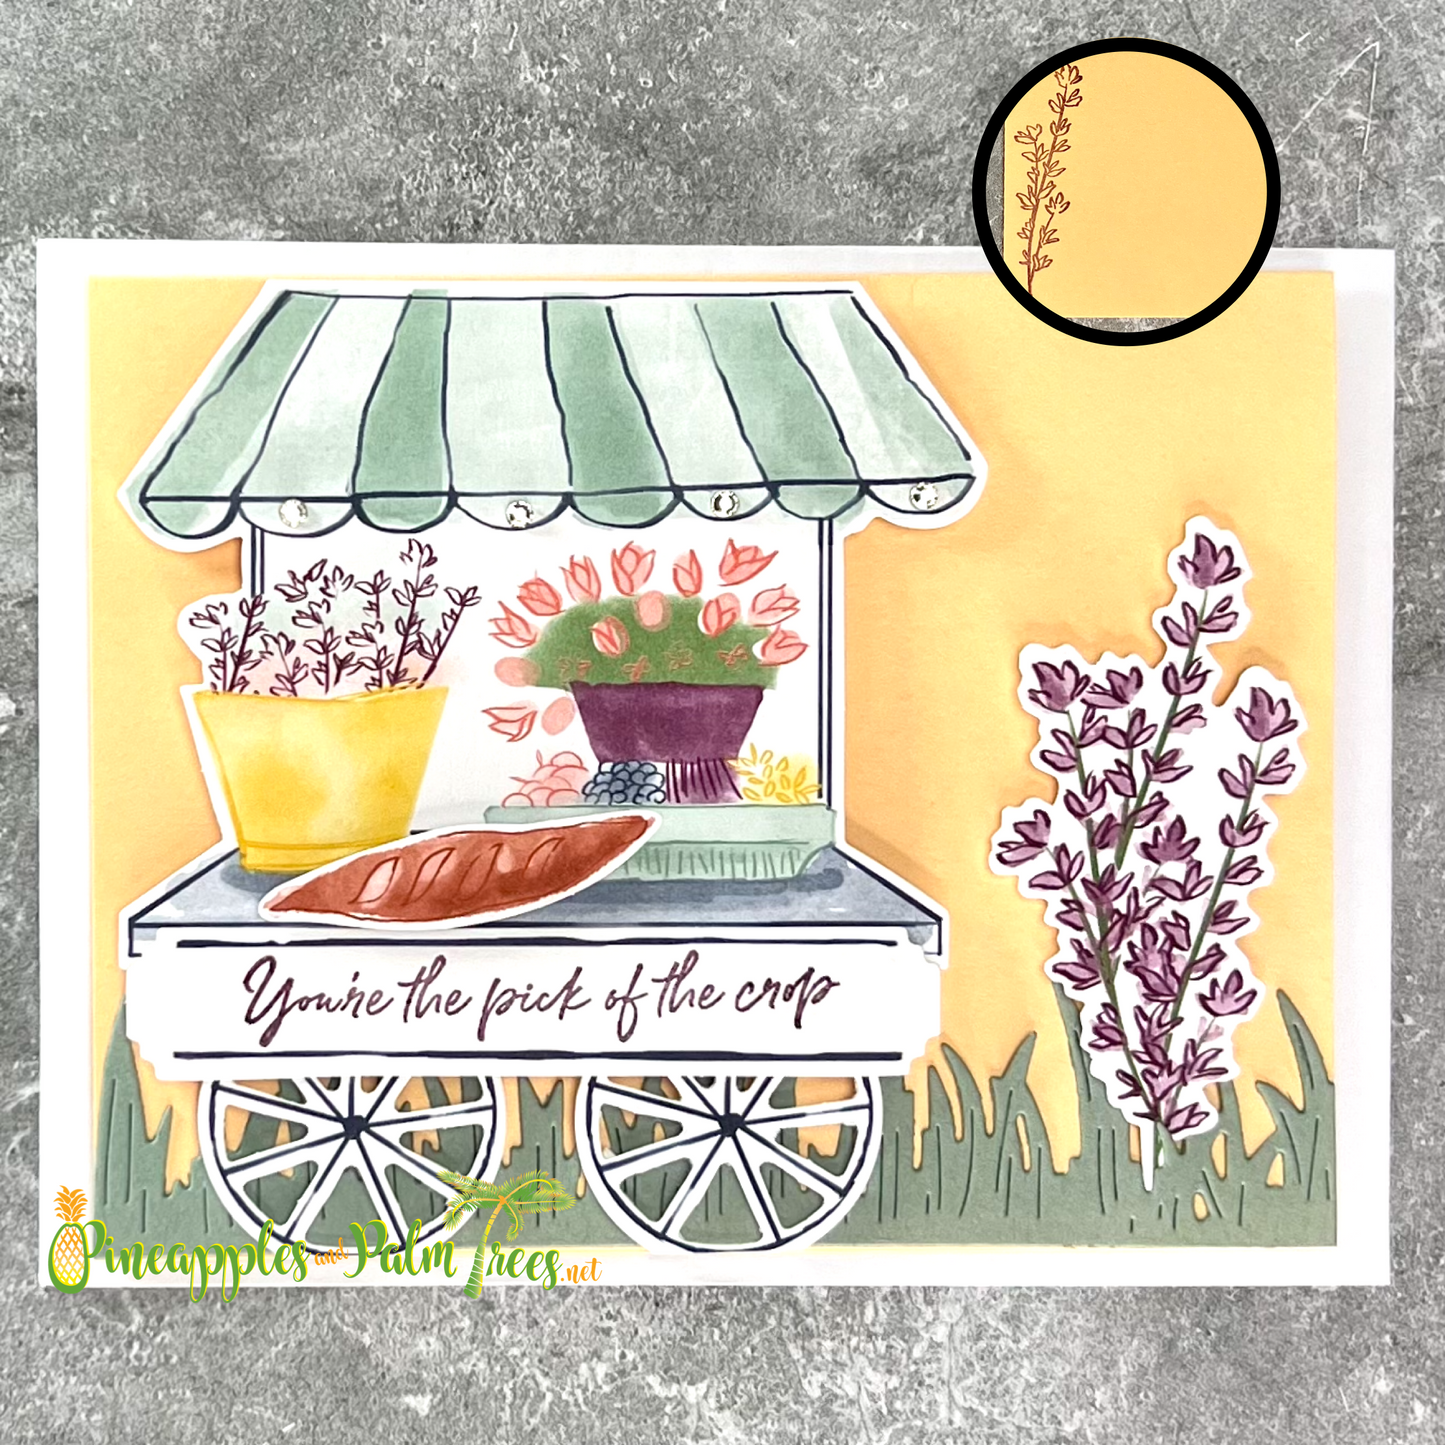 Greeting Card: You're the Pick of the Crop - landscape vendor cart